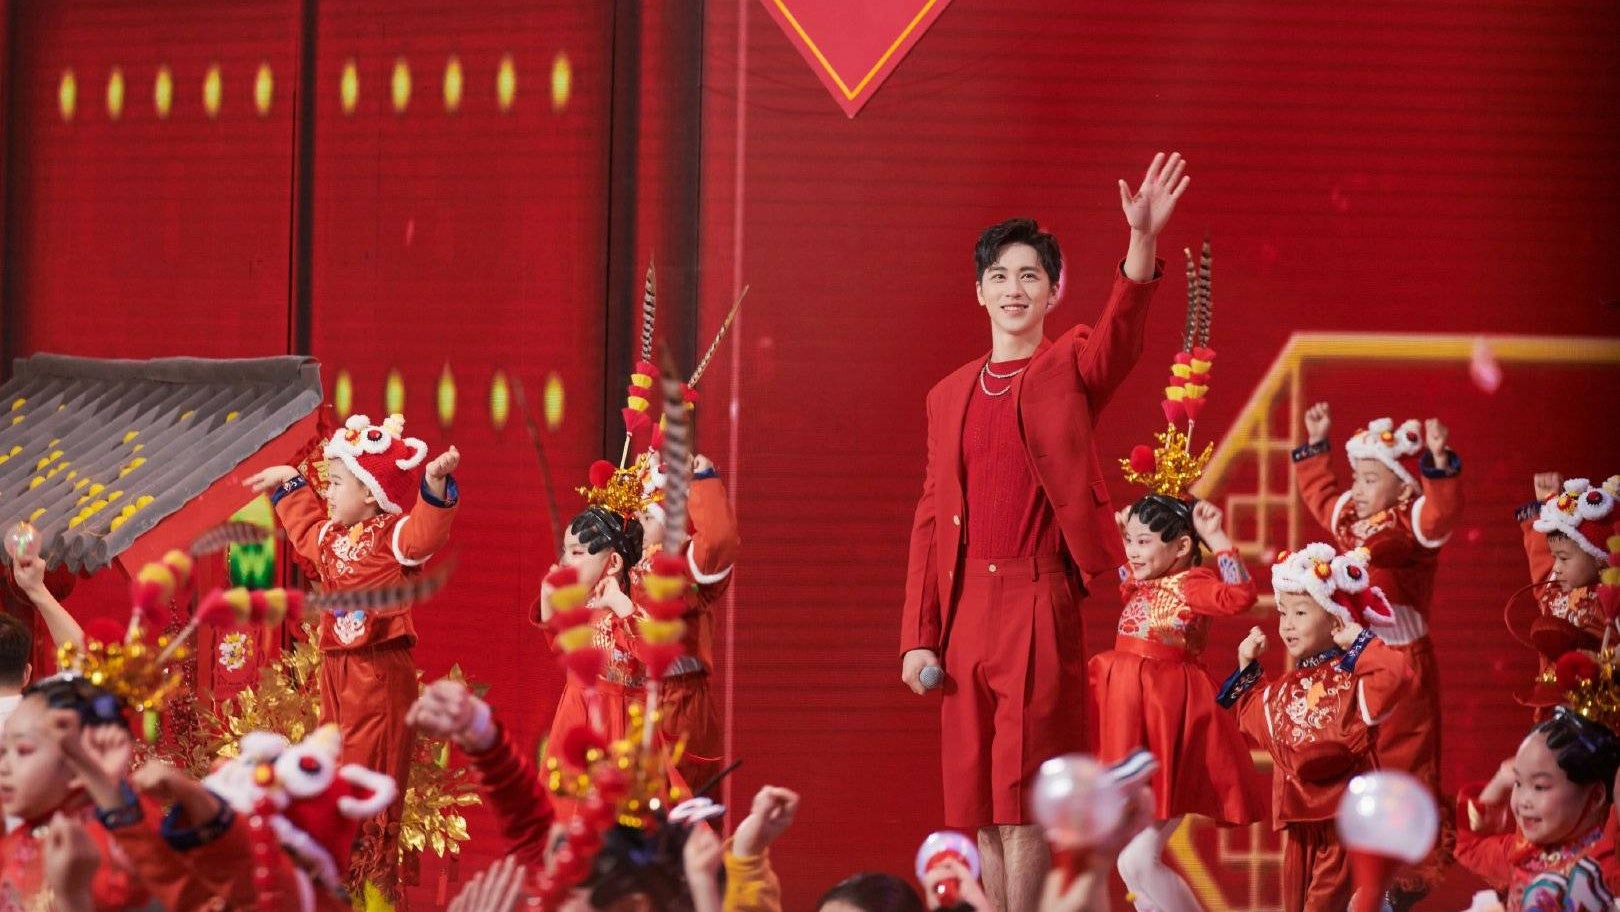 Over one billion viewers tuned in to one of luxury’s biggest opportunities, China’s 2021 Spring Festival Gala. So, who were the real winners of this glamorous event?  Photo: Fendi's Weibo